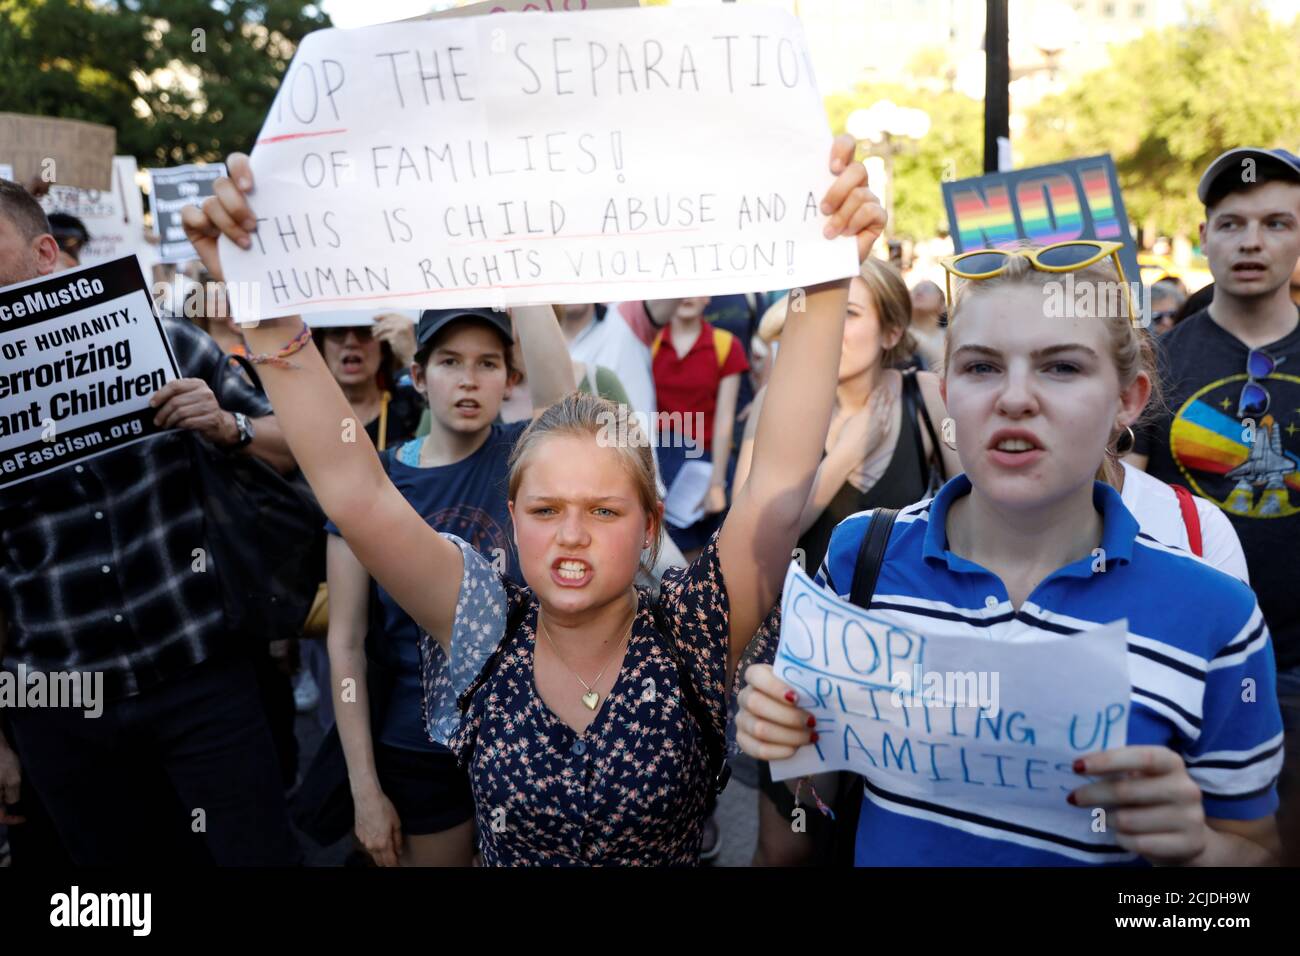 People protest against the Trump administration policy of separating immigrant families suspected of illegal entry, in New York, NY, U.S., June 19, 2018.  REUTERS/Brendan McDermid Stock Photo